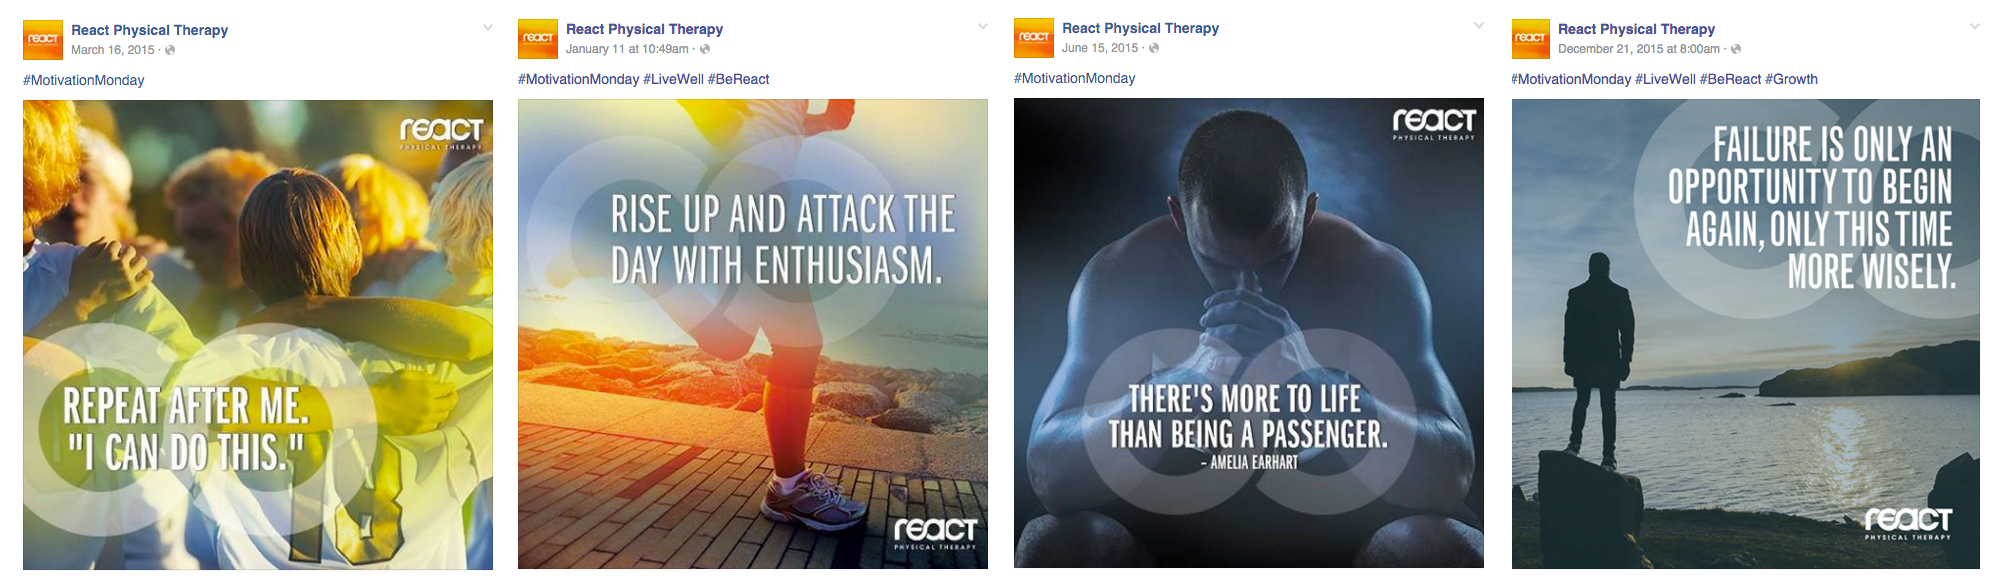 React Physical Therapy Social Posts